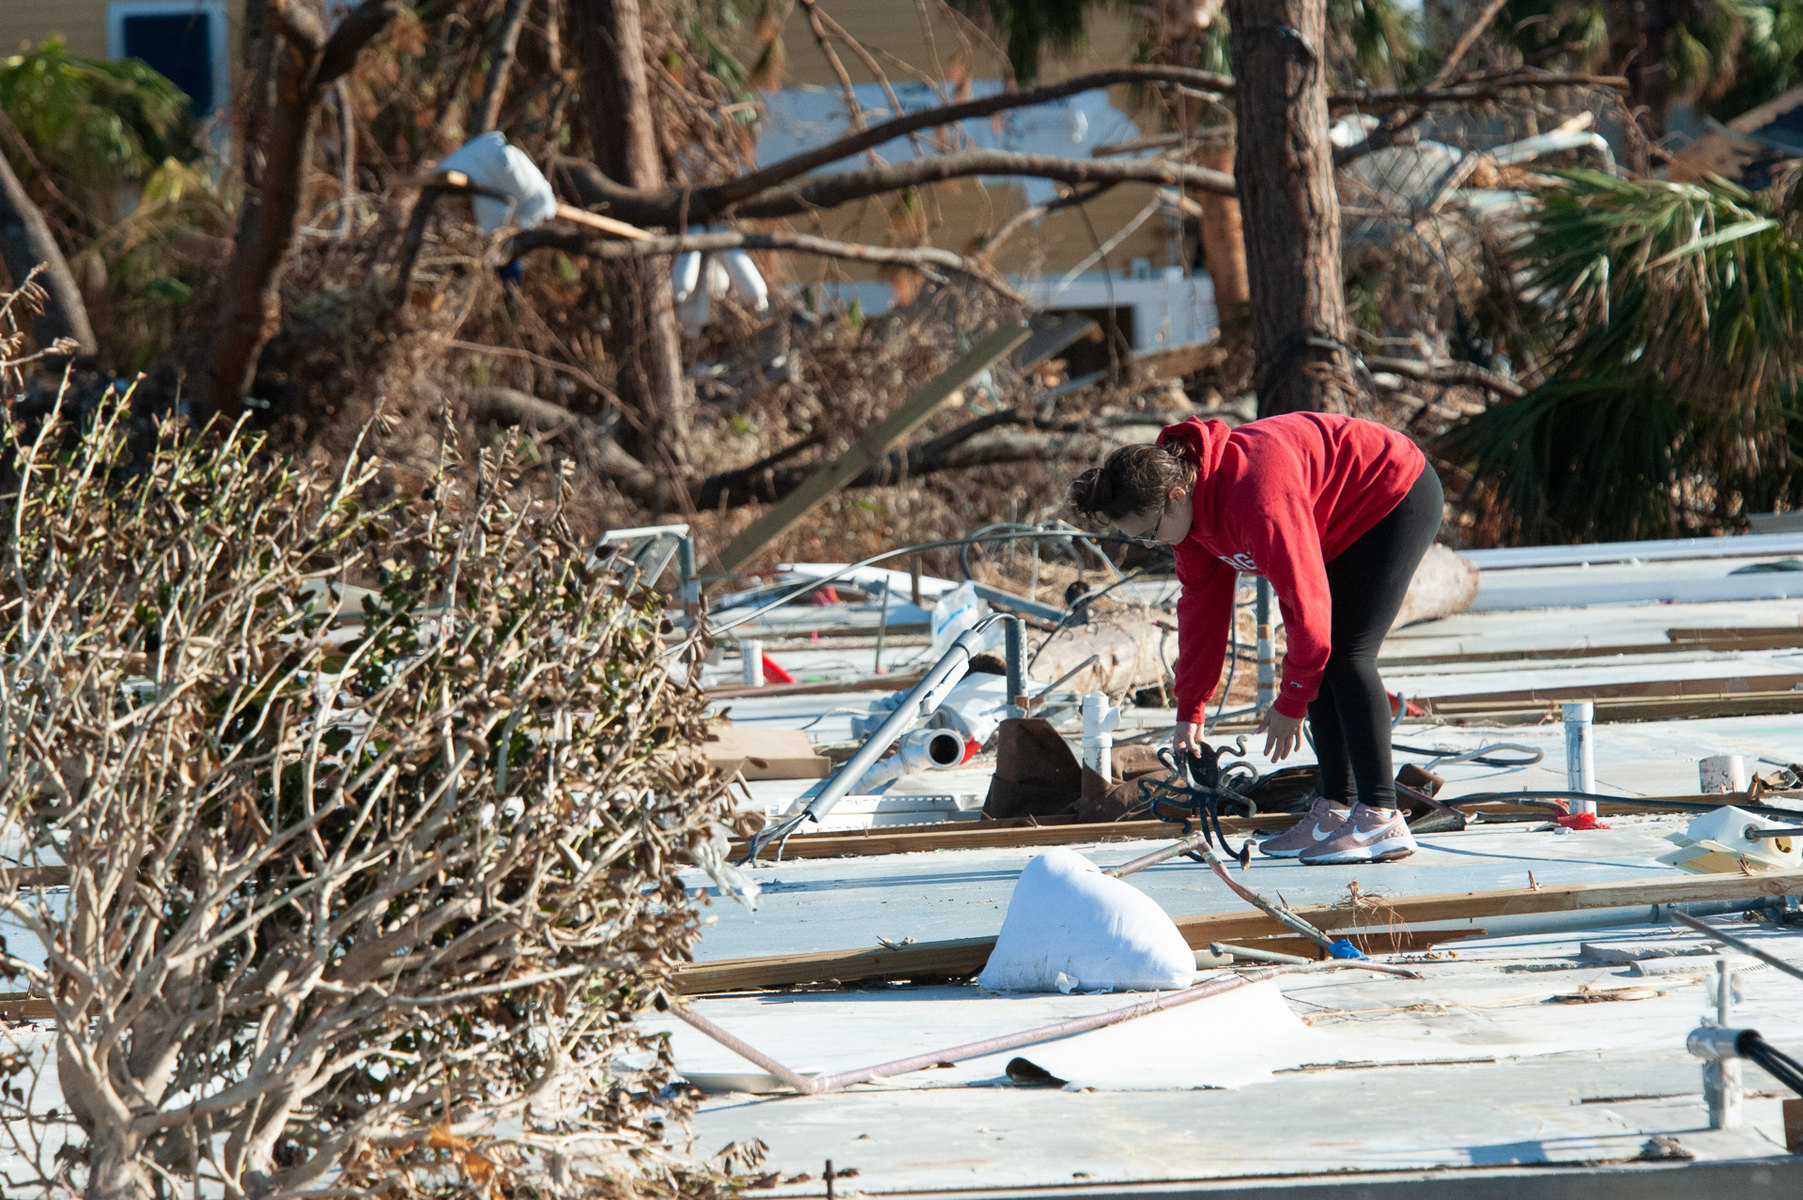 October 18, 2018 - Mexico Beach, FL - A young girl shifts through what is left of her parents vacation home in Mexico Beach, Florida after Hurricane Michael as passed through the area on October 15, 2018 in Mexico Beach, Florida.  The hurricane hit the Florida Panhandle as a category 5 storm causing massive damage and claimed the lives of more then a dozen people.